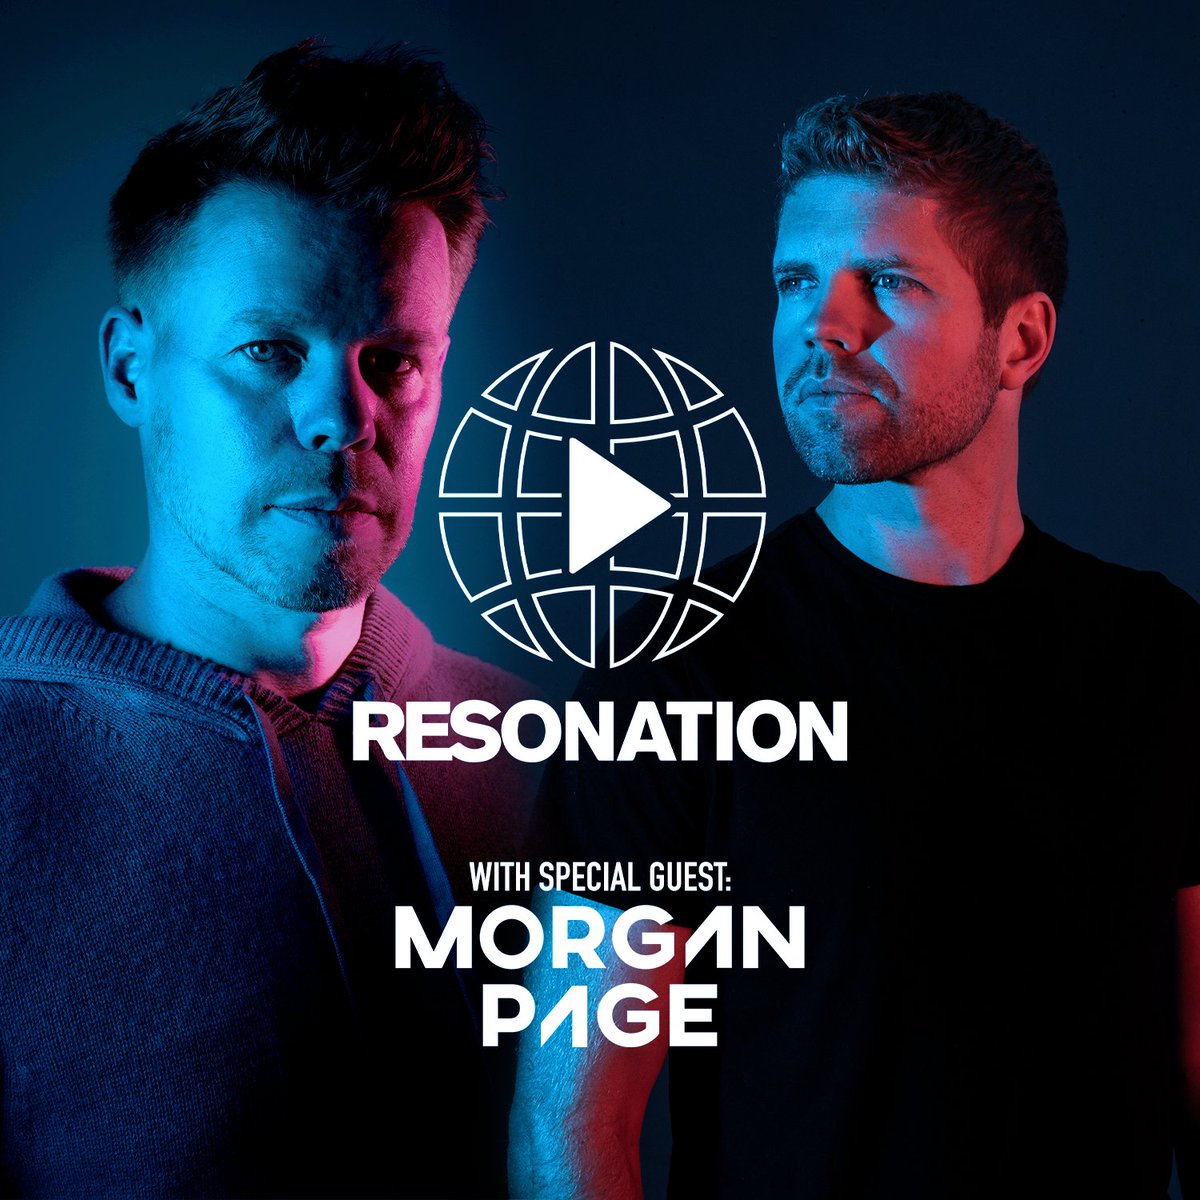 Tonight in @ResonationRadio, we've got music by BLR (@BolierMusic), @eelkekleijn & a special guest mix by @morganpage from his studio in Los Angeles! Make sure to tune in at 8 P.M. CET. 🔥f